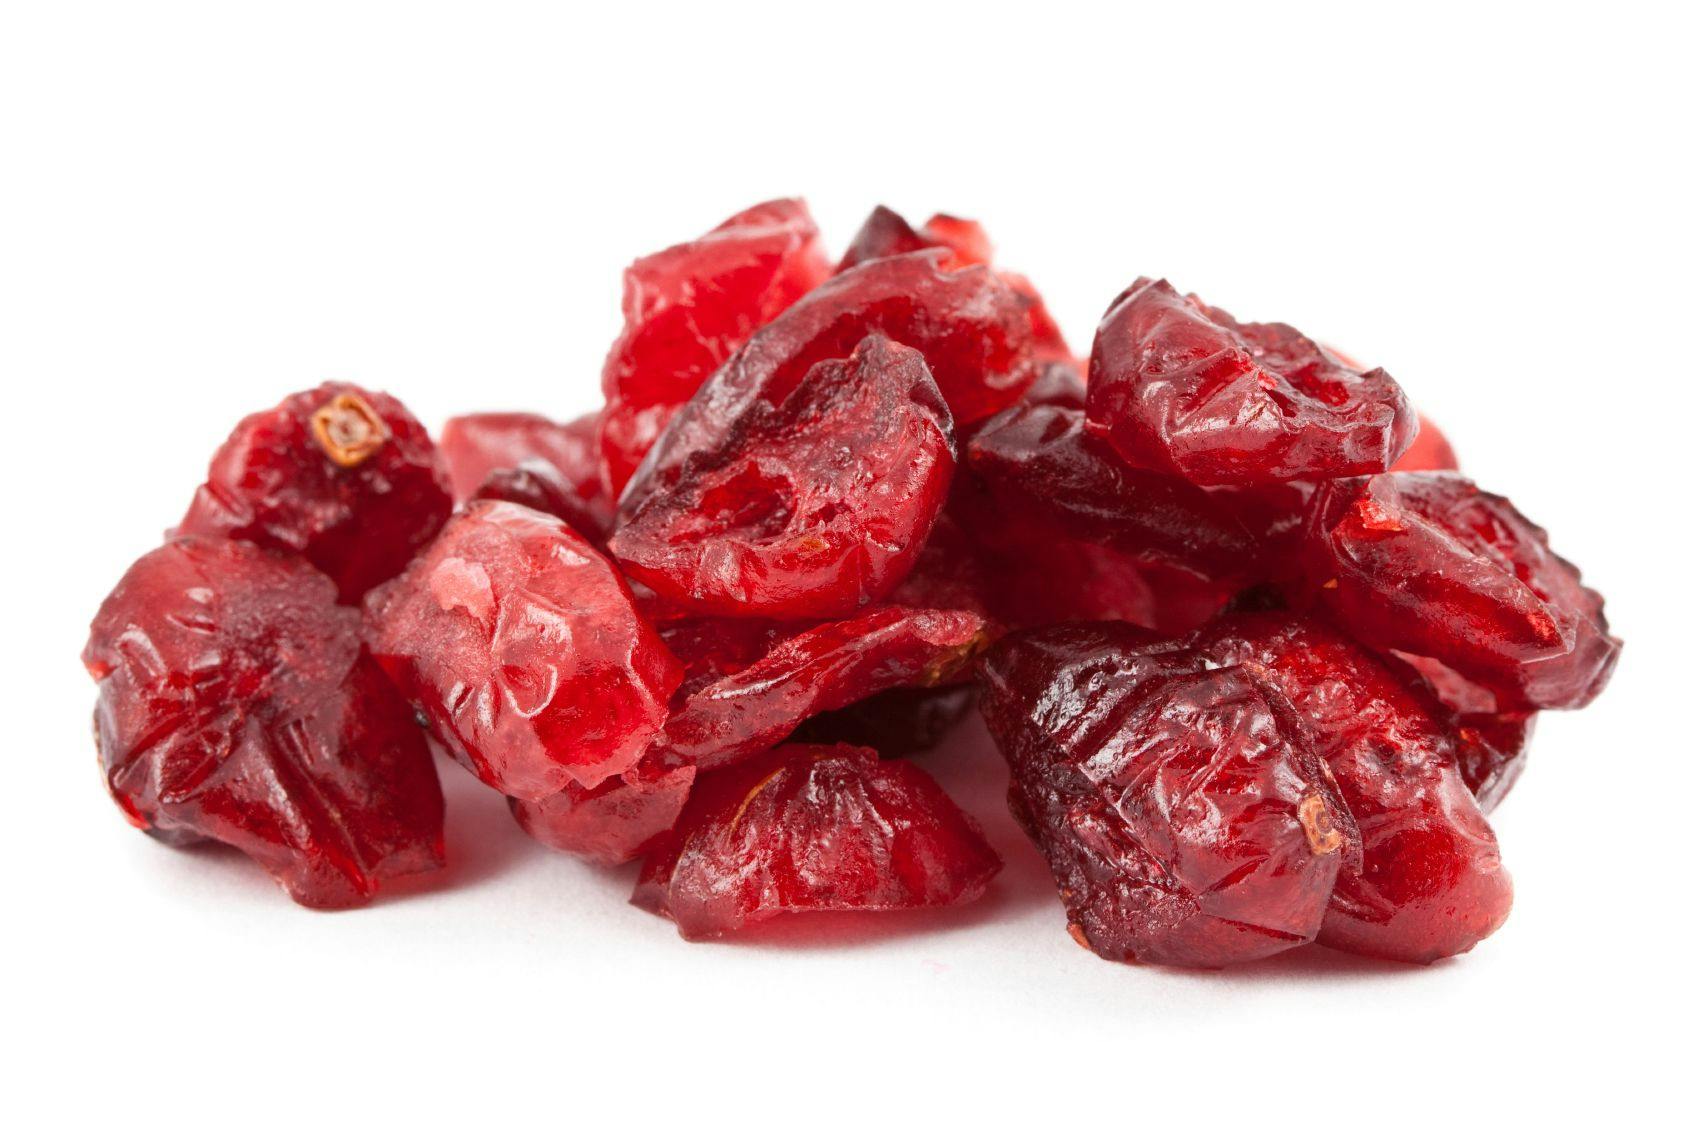 High PAC–Cranberry Study Shows Powerful Bacterial Anti-Adhesion